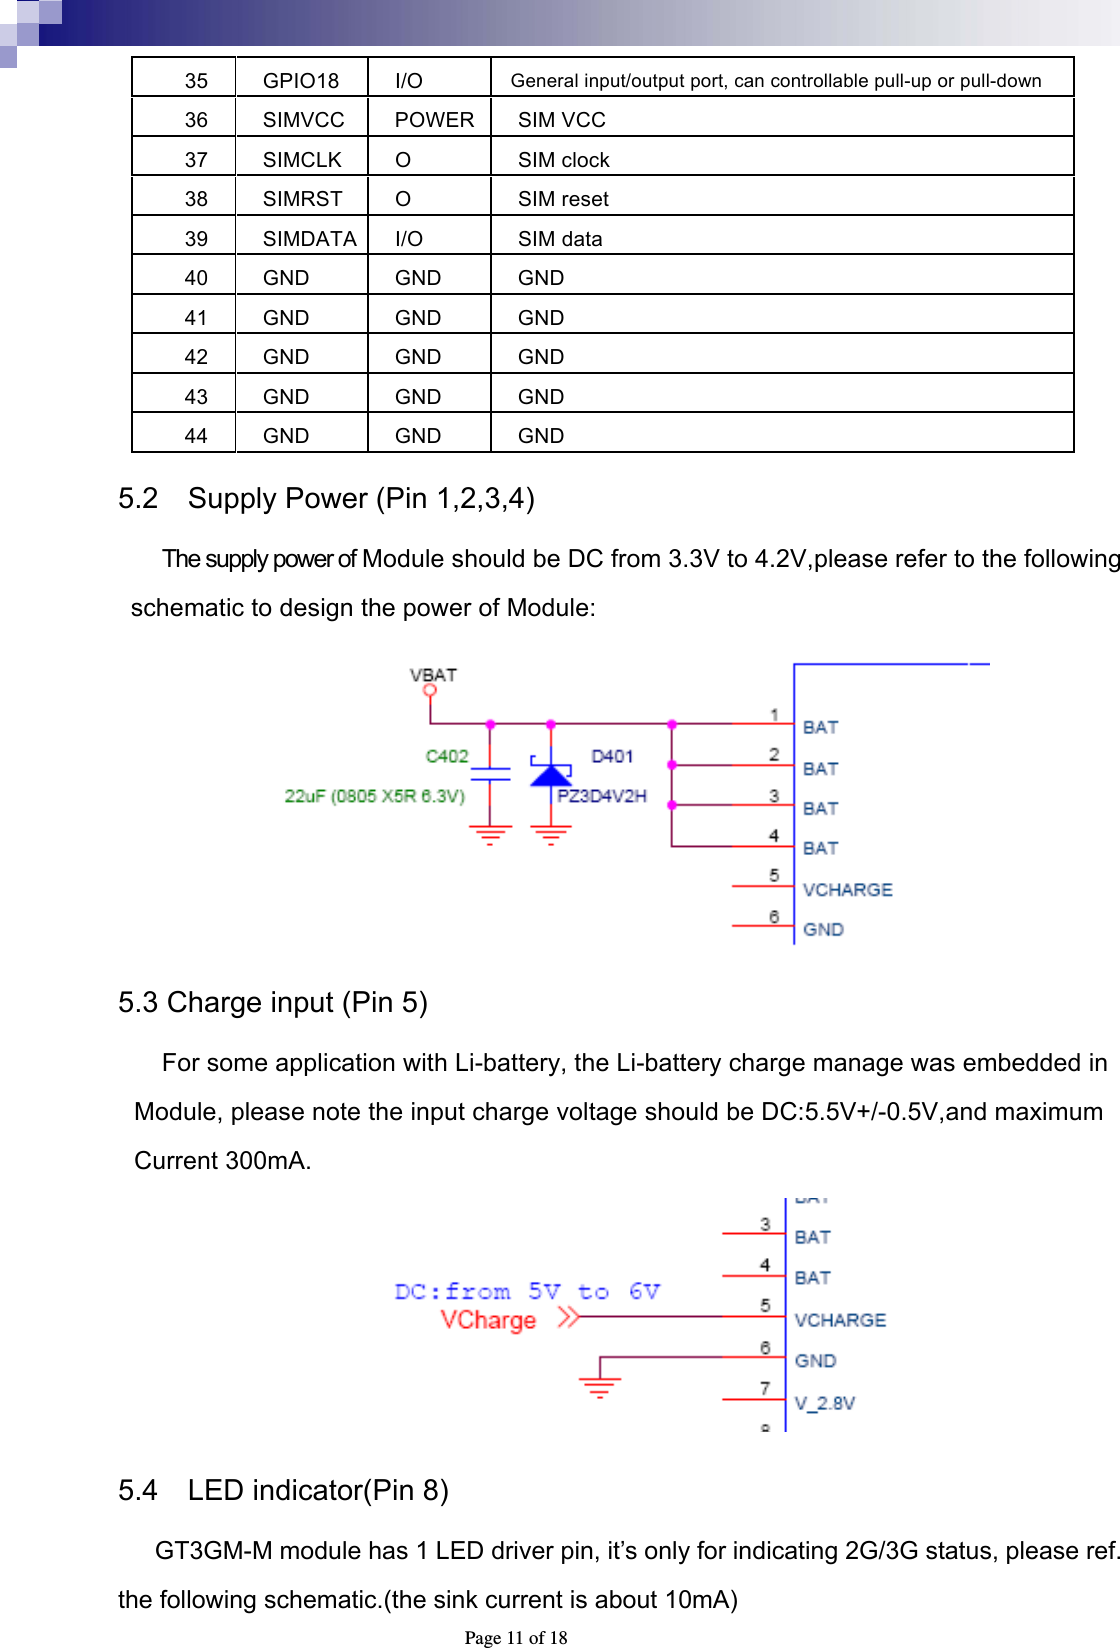  Page 11 of 18 35 GPIO18 I/O  General input/output port, can controllable pull-up or pull-down 36 SIMVCC POWER SIM VCC 37 SIMCLK O  SIM clock 38 SIMRST O  SIM reset 39 SIMDATA I/O  SIM data 40 GND  GND  GND 41 GND  GND  GND 42 GND  GND  GND 43 GND  GND  GND 44 GND  GND  GND 5.2    Supply Power (Pin 1,2,3,4) The supply power of Module should be DC from 3.3V to 4.2V,please refer to the following schematic to design the power of Module:  5.3 Charge input (Pin 5)   For some application with Li-battery, the Li-battery charge manage was embedded in Module, please note the input charge voltage should be DC:5.5V+/-0.5V,and maximum Current 300mA.  5.4    LED indicator(Pin 8)  GT3GM-M module has 1 LED driver pin, it’s only for indicating 2G/3G status, please ref. the following schematic.(the sink current is about 10mA) 